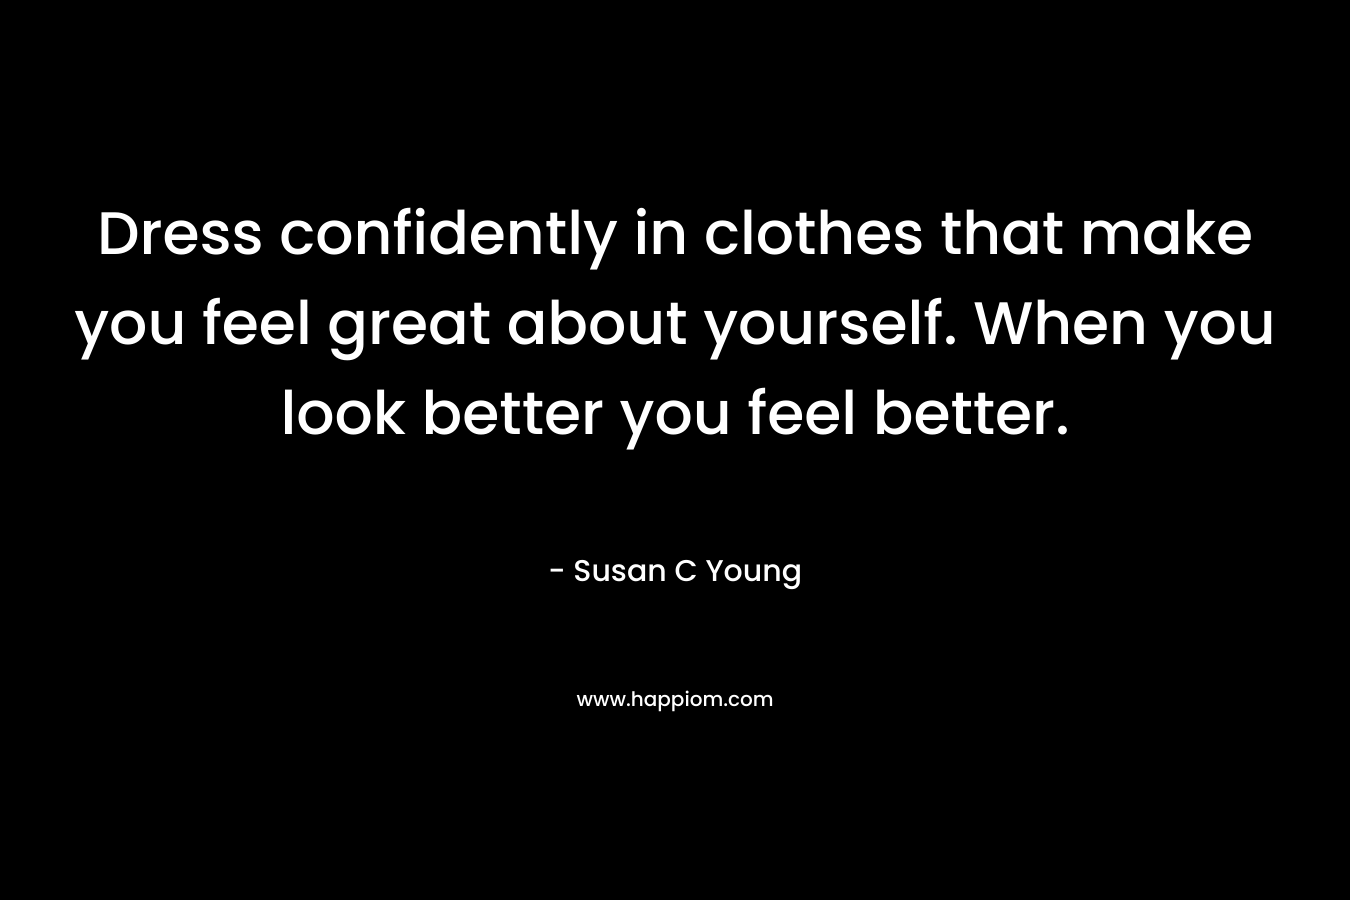 Dress confidently in clothes that make you feel great about yourself. When you look better you feel better.